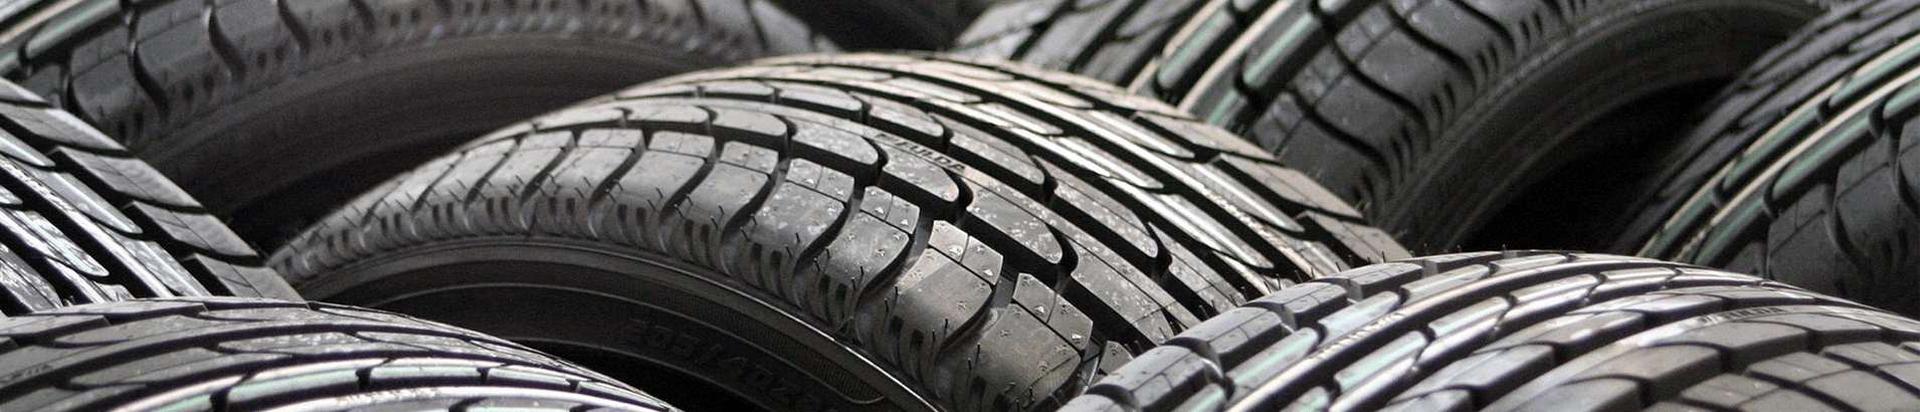 Light and heavy duty tyres, Tyre repair services, including wheel adjustment and balancing, Tyres for passenger cars, Tyres for buses, Explosive material, Maintenance and repair of motor vehicles